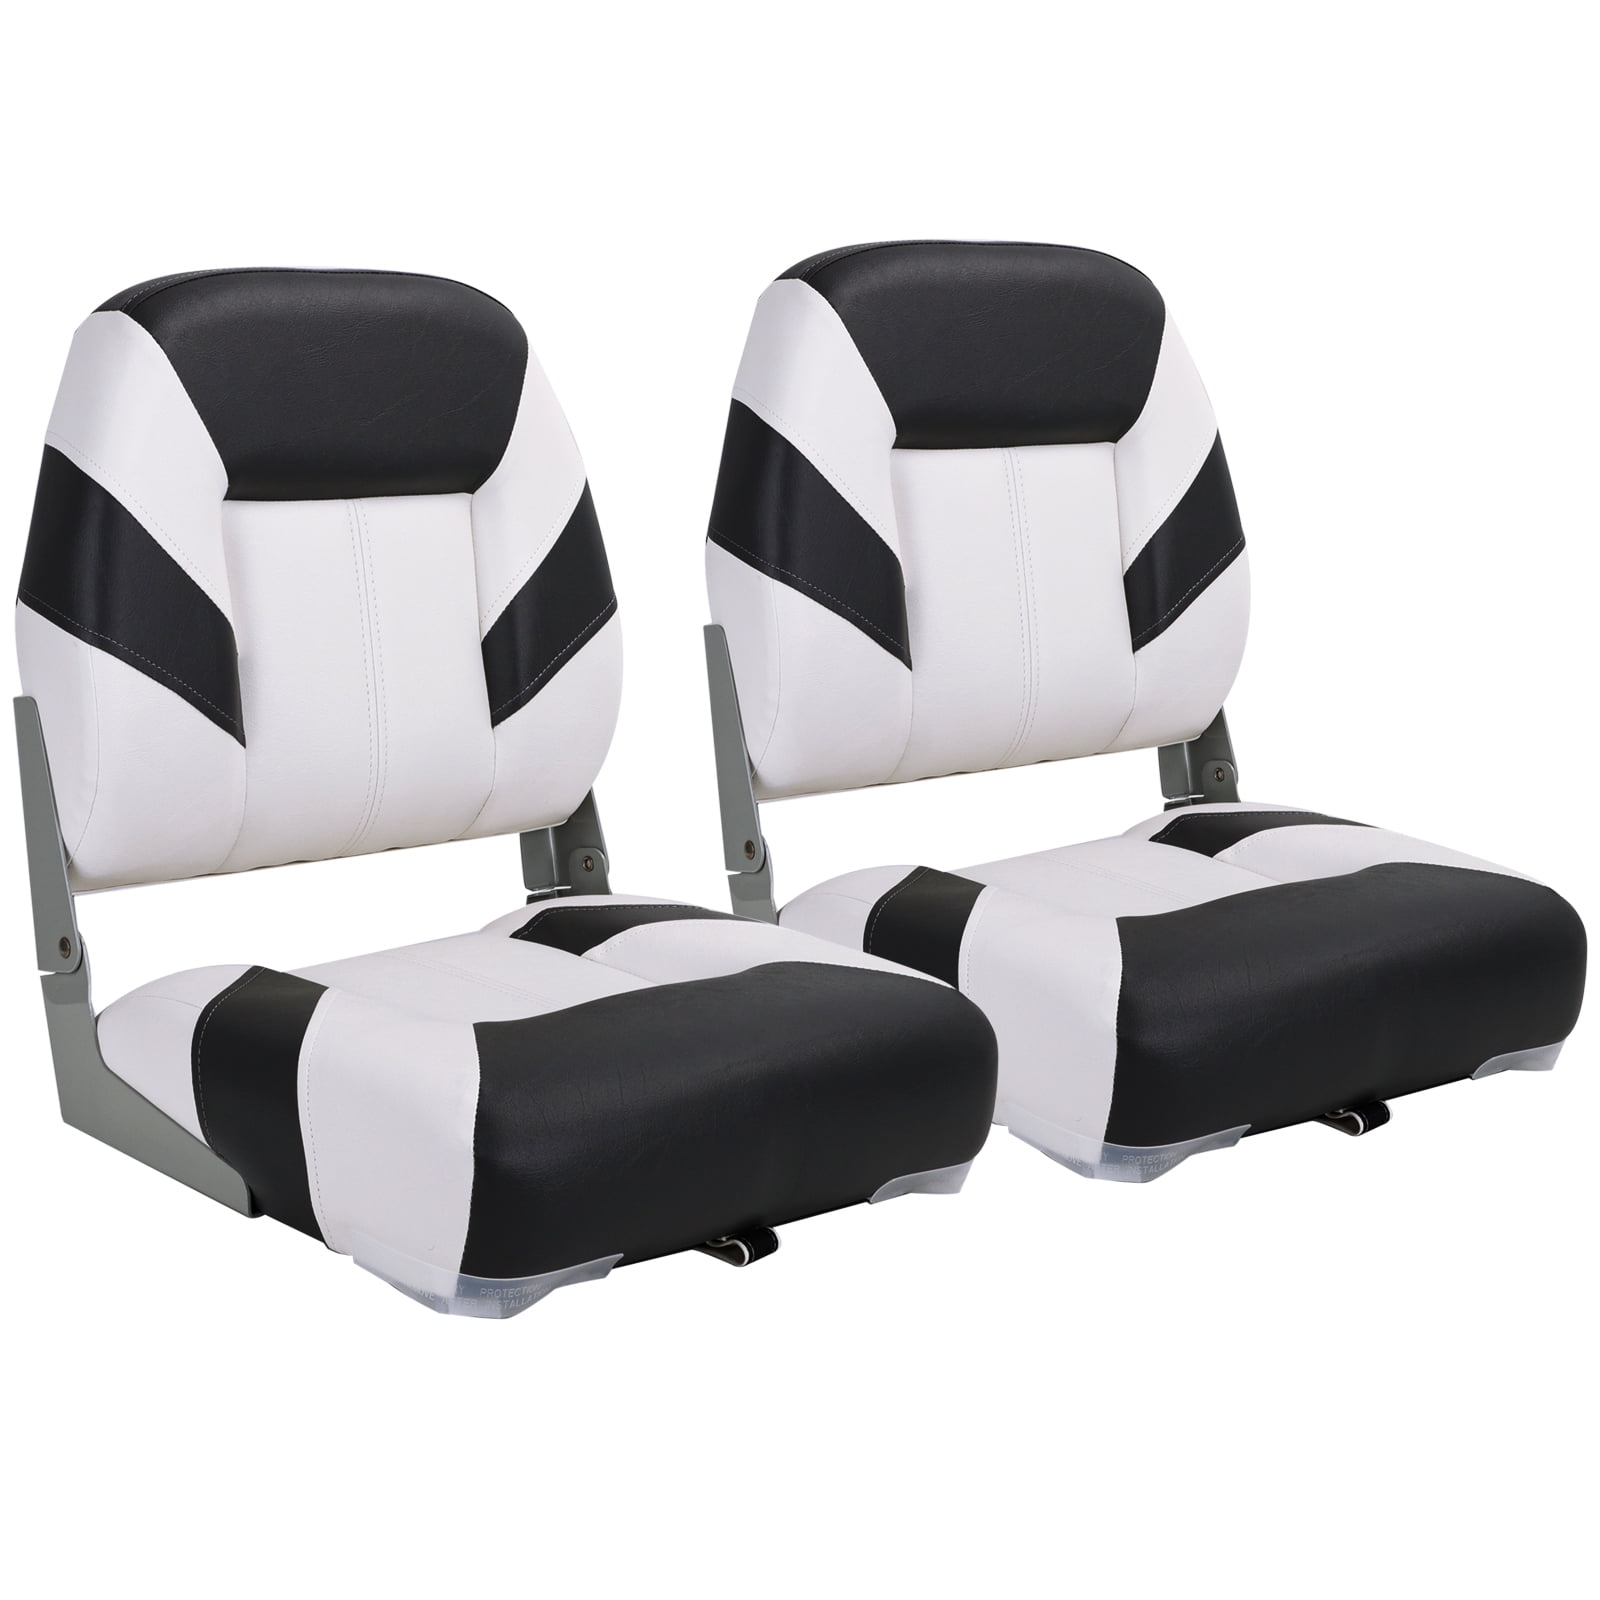 NORTHCAPTAIN Deluxe White/Black Low Back Folding Boat Seat, 2 Seats ...